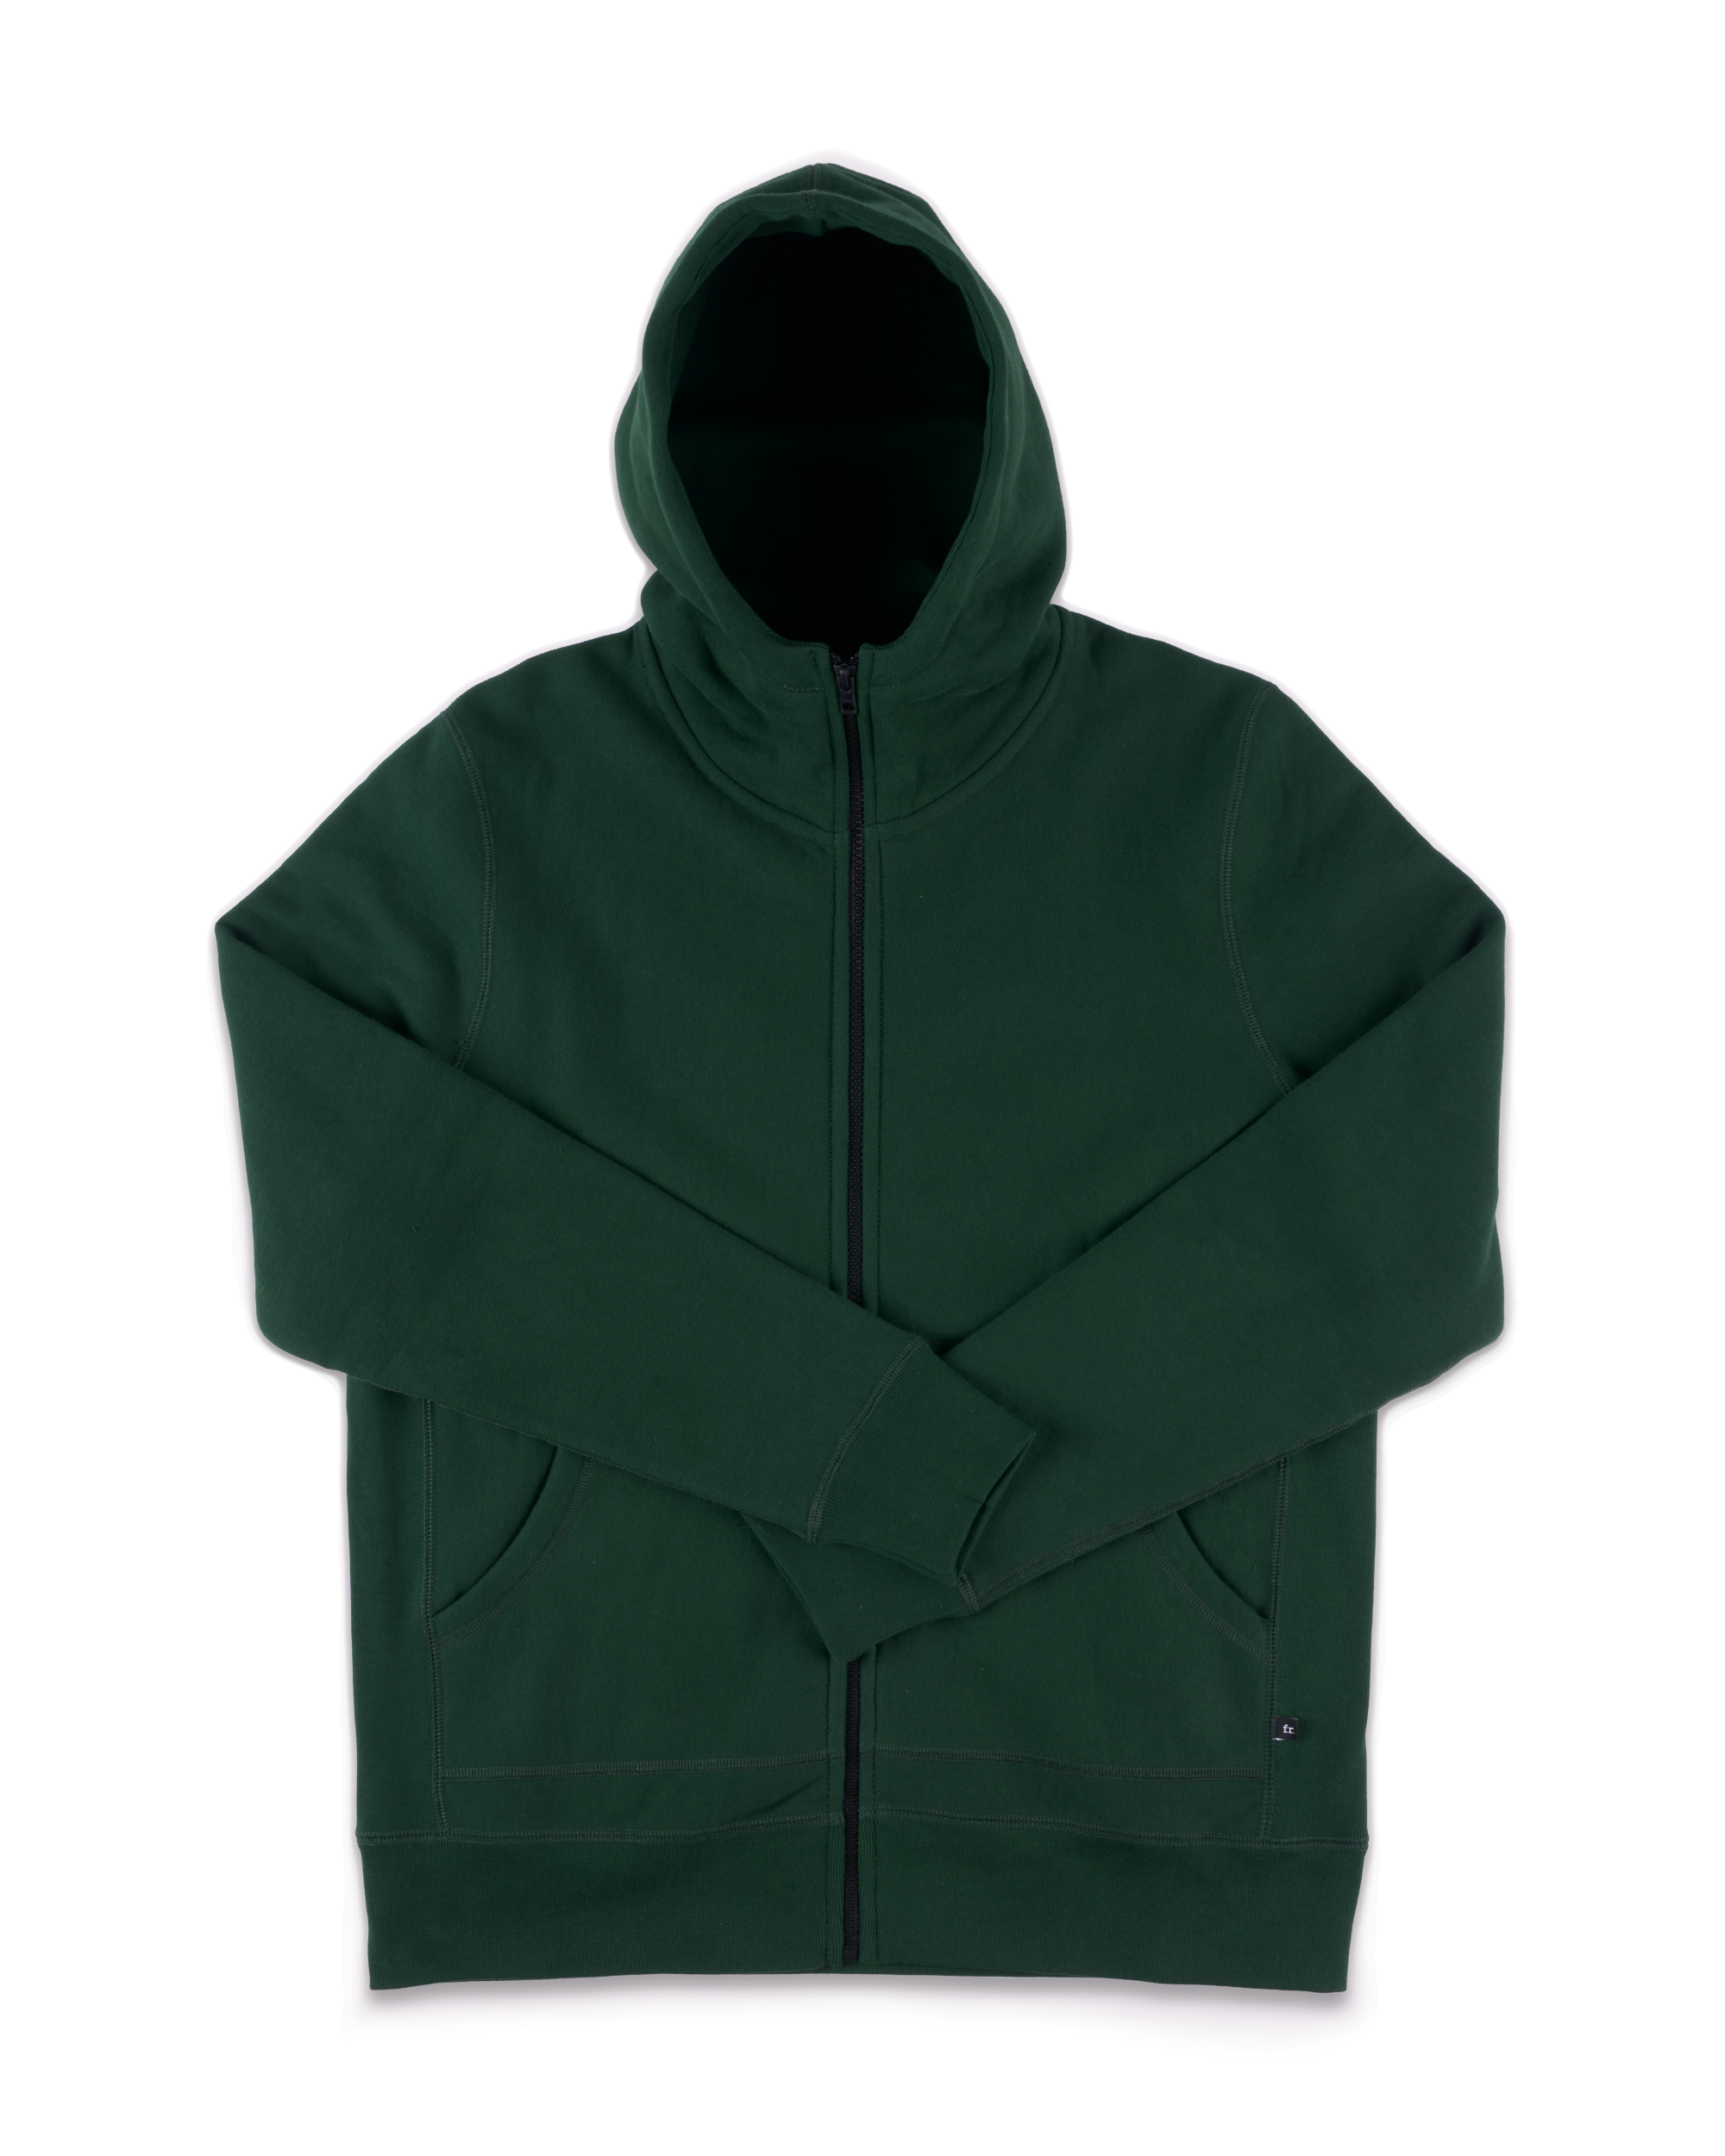 High Neck Hooded Sweatshirt Green - Foreign Rider Co.